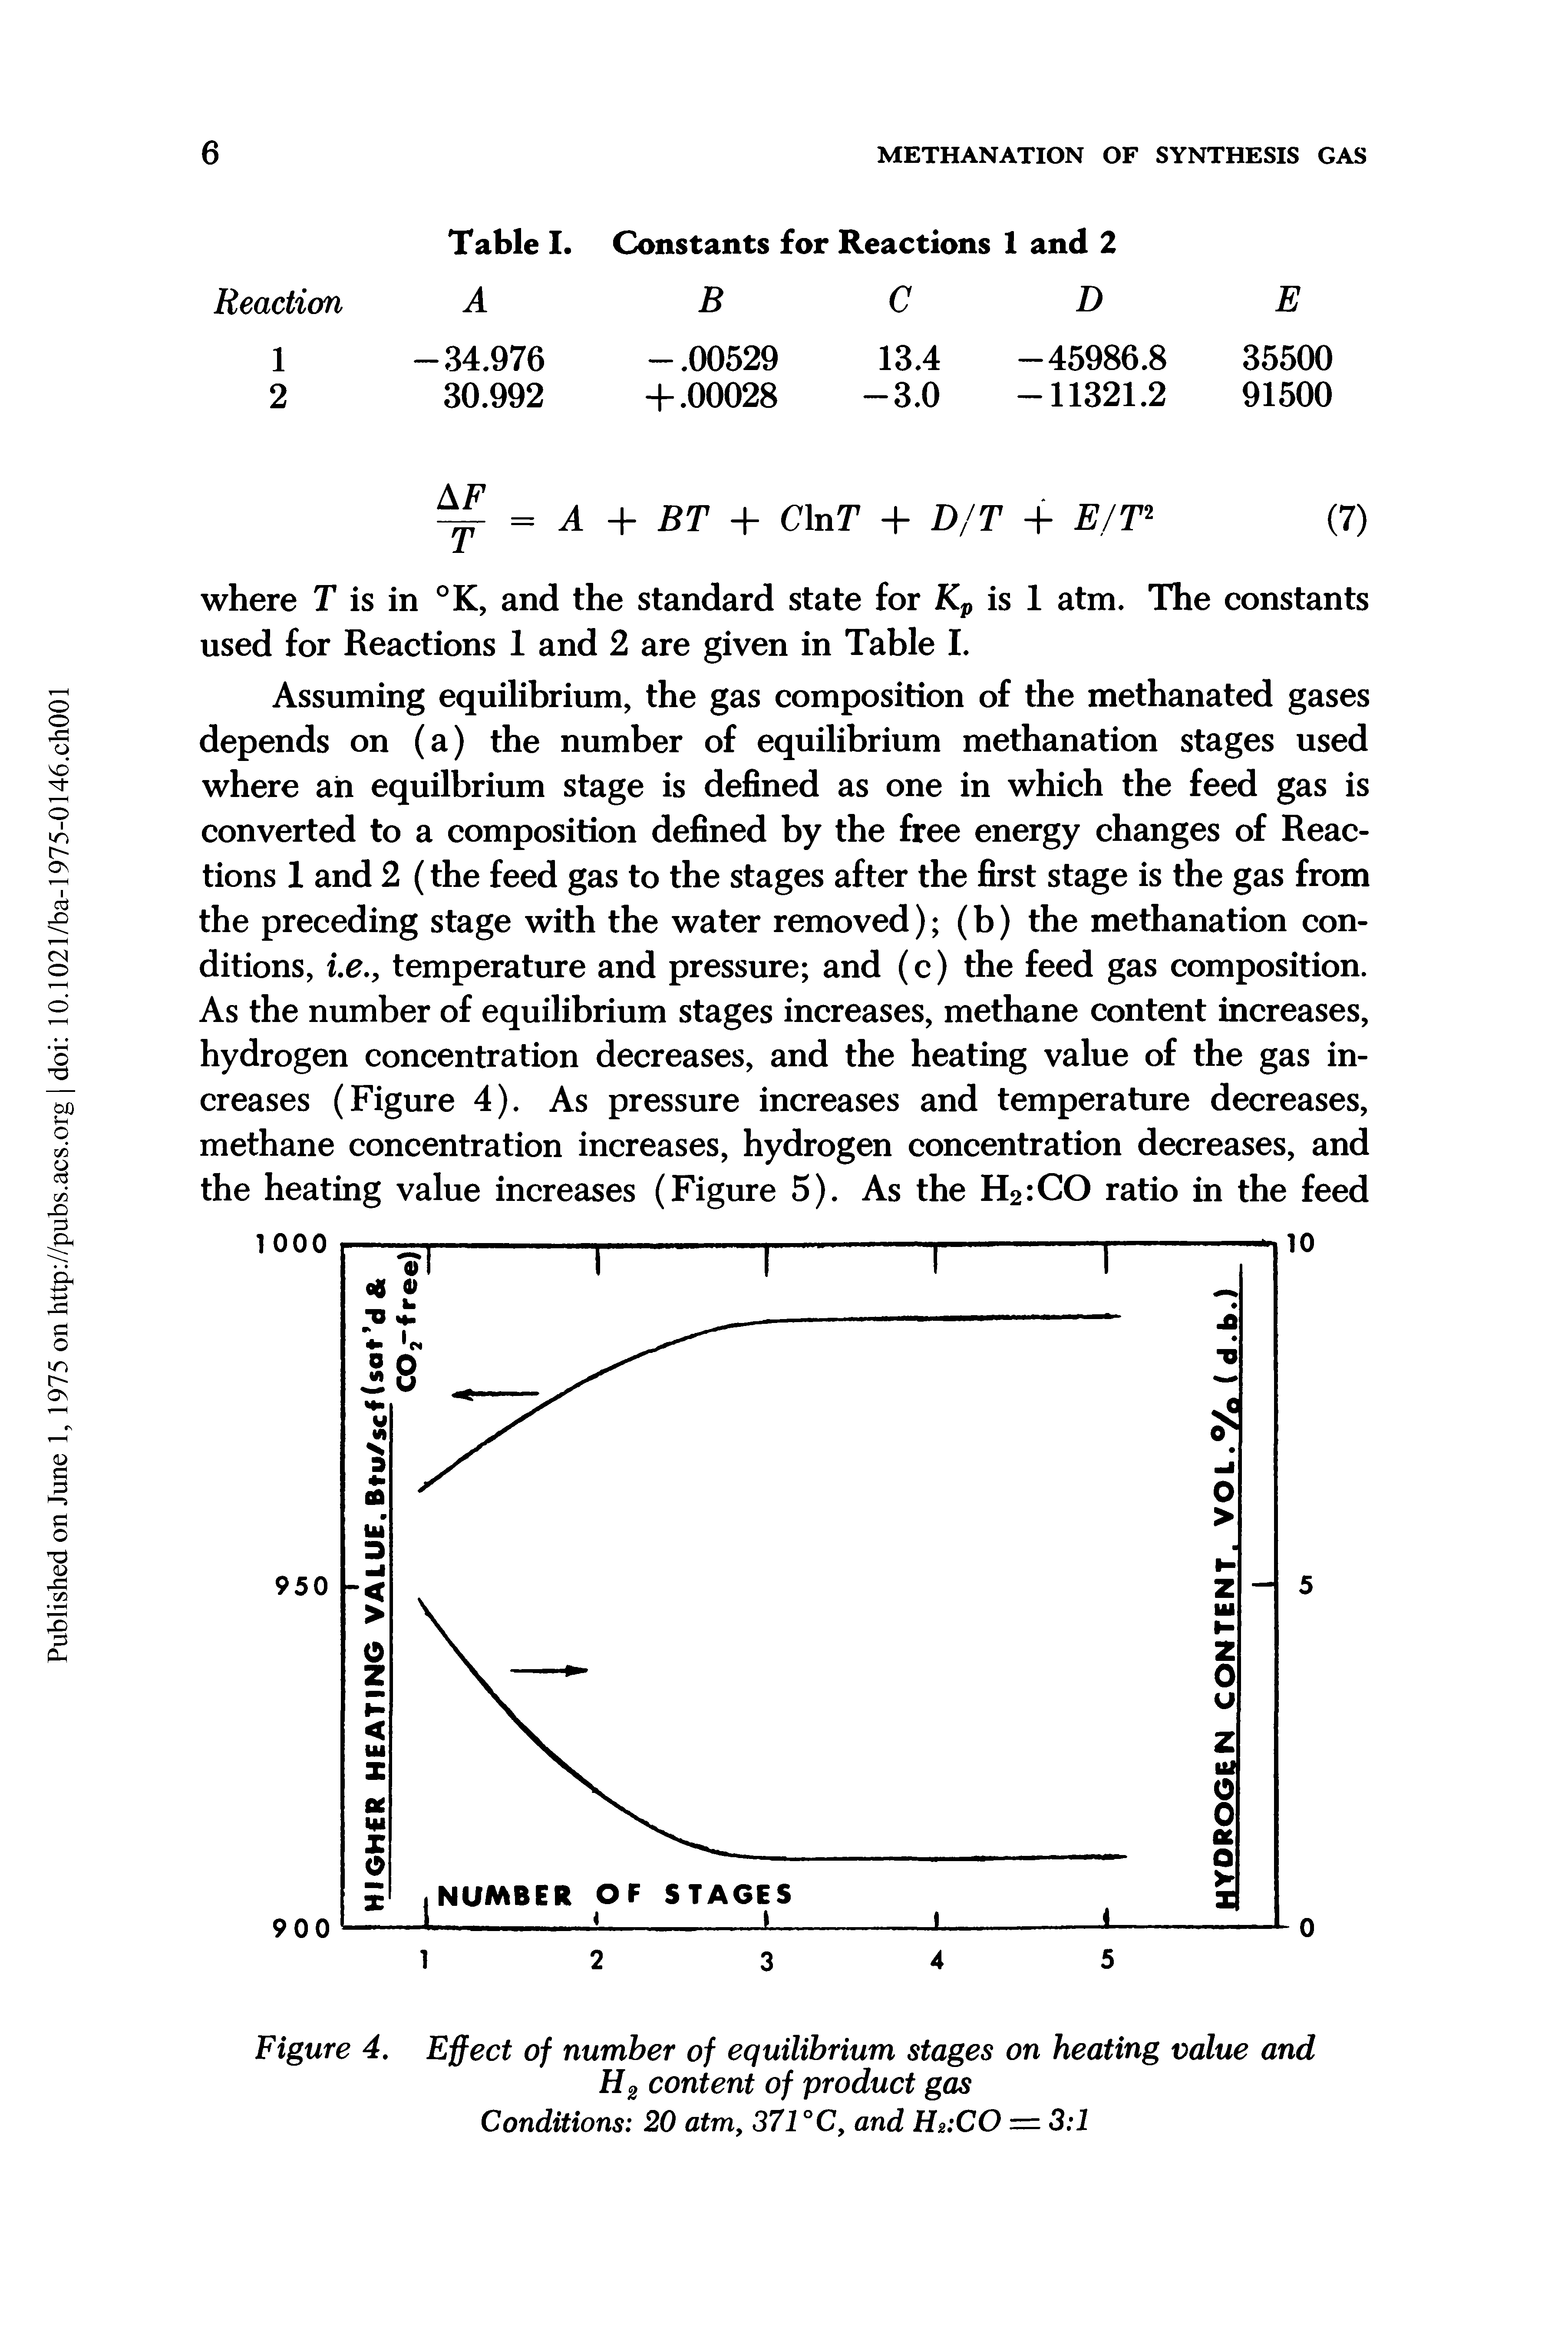 Figure 4. Effect of number of equilibrium stages on heating value and H2 content of product gas Conditions 20 atm, 371 °C, and Hu.CO = 3 1...